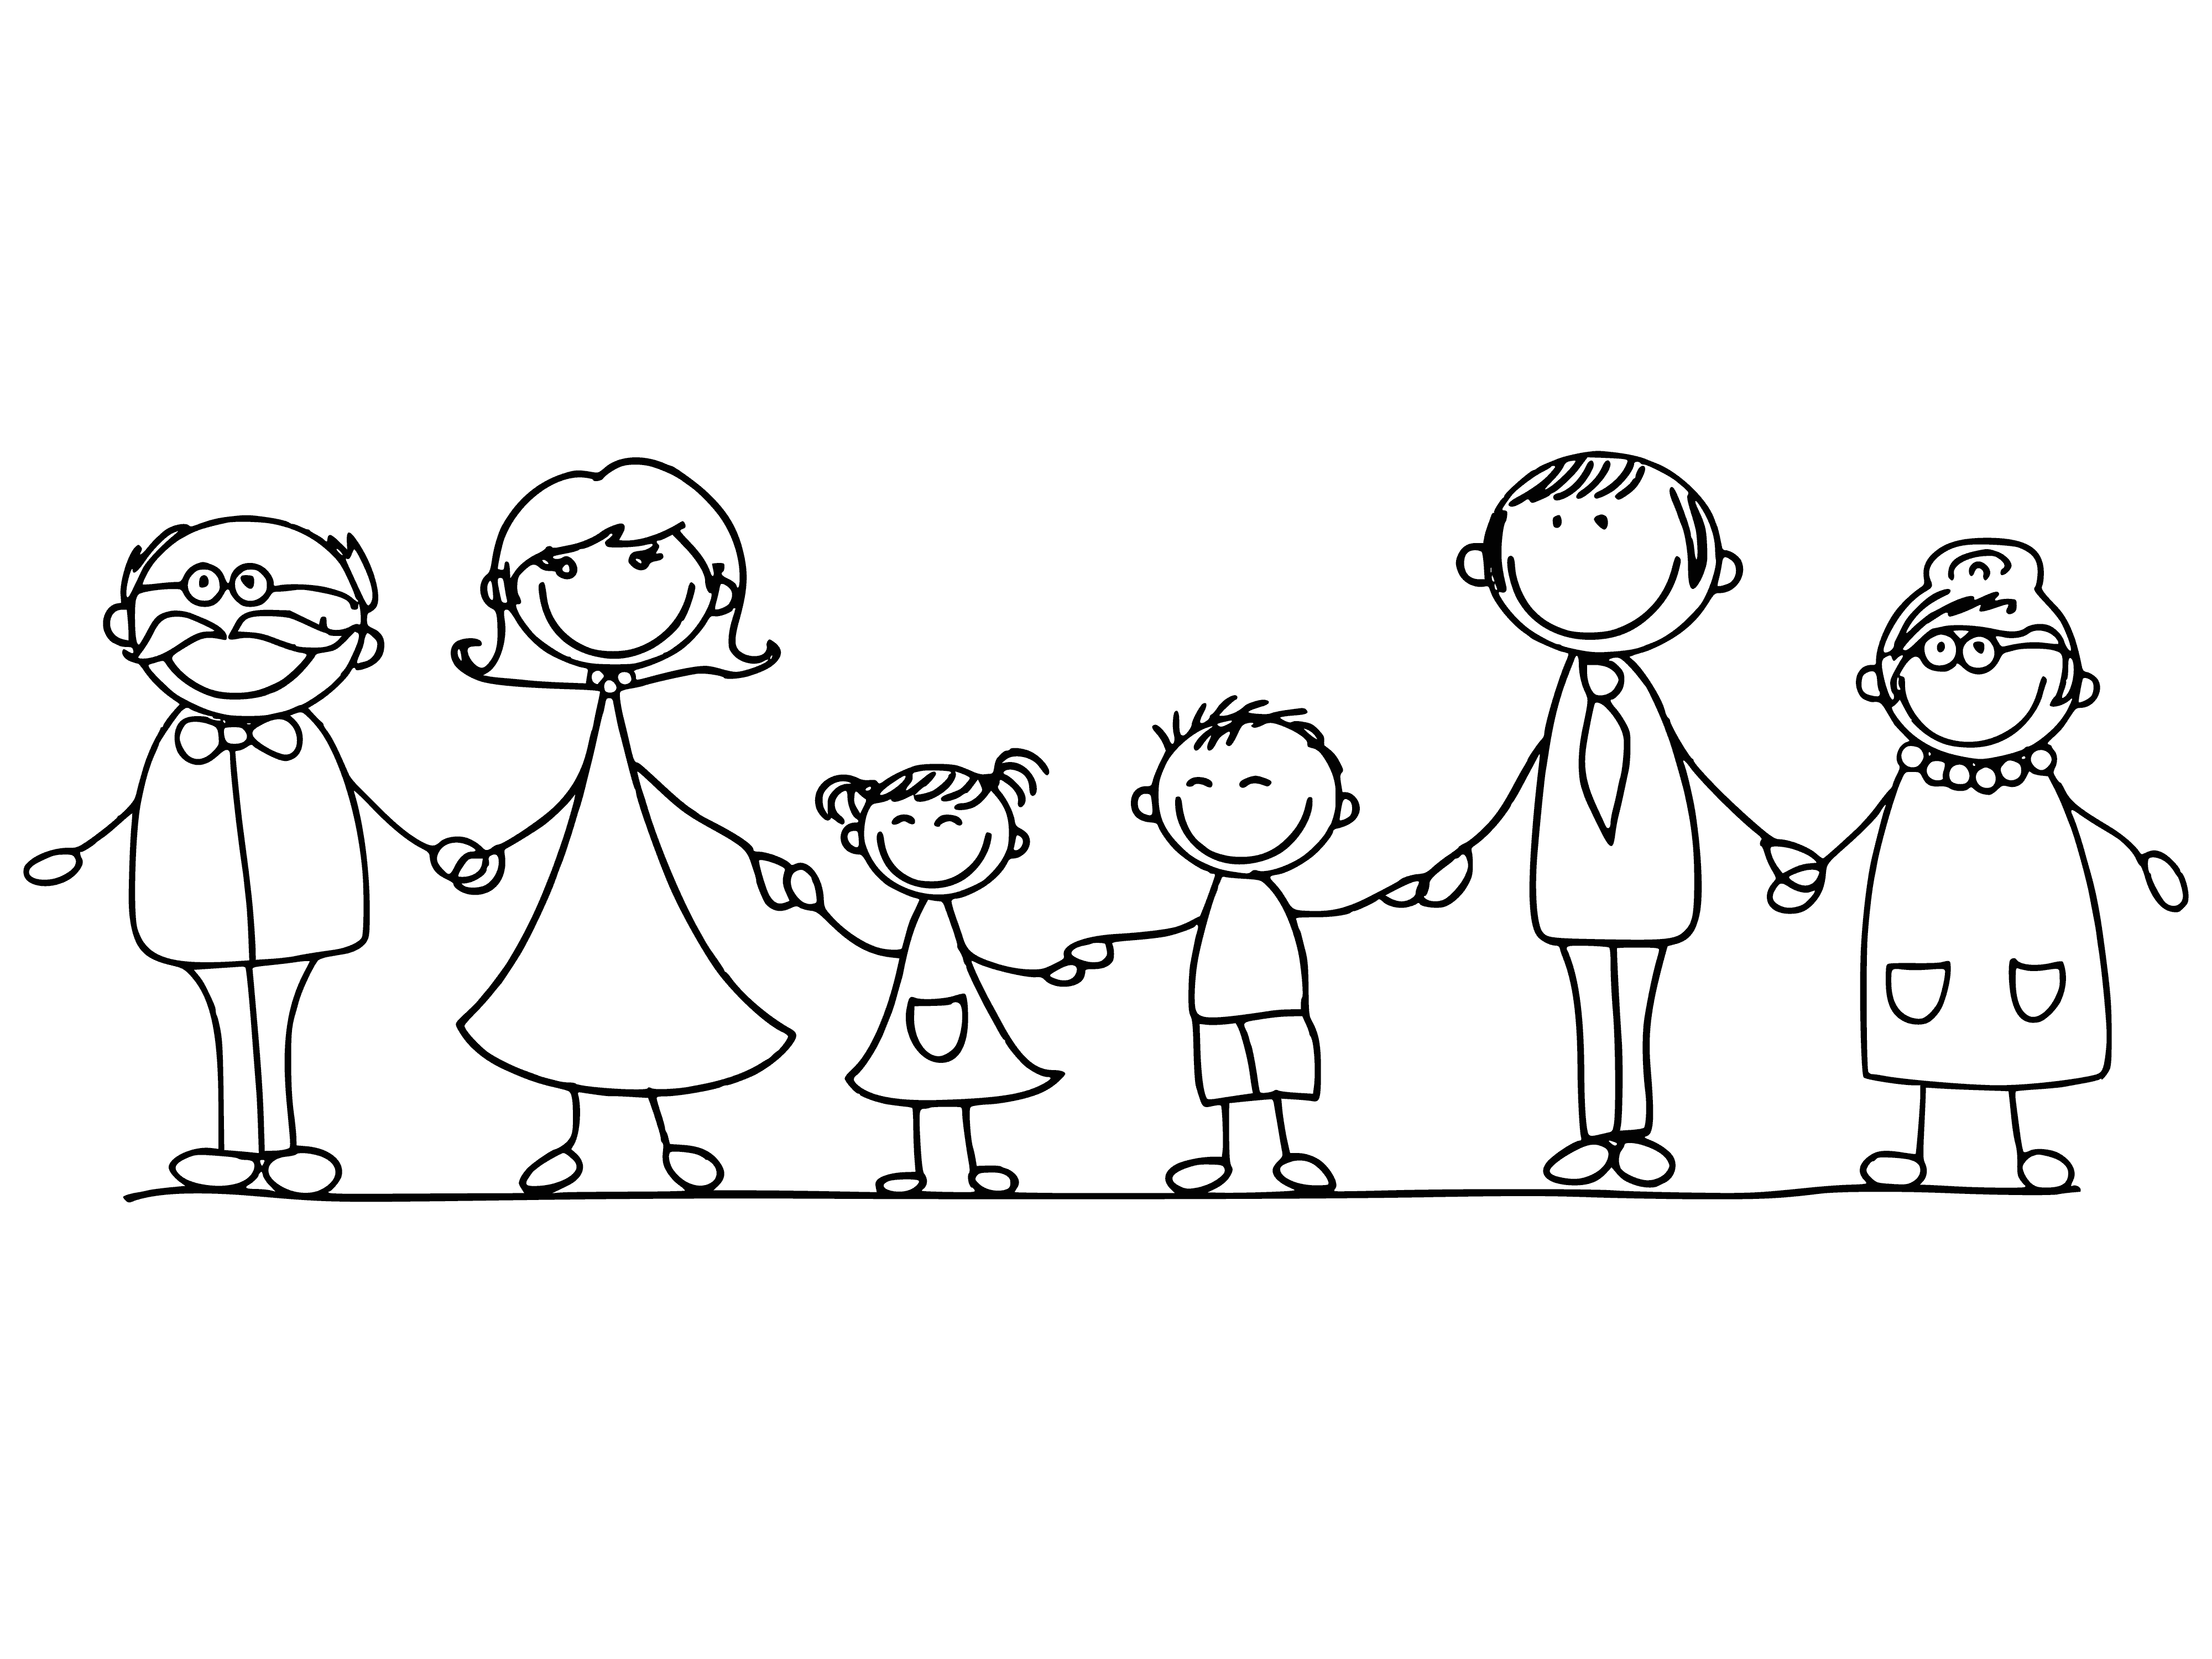 coloring page: Family of four with dad holding baby, mom holding toddler's hand. All are smiling at the camera. #familytime